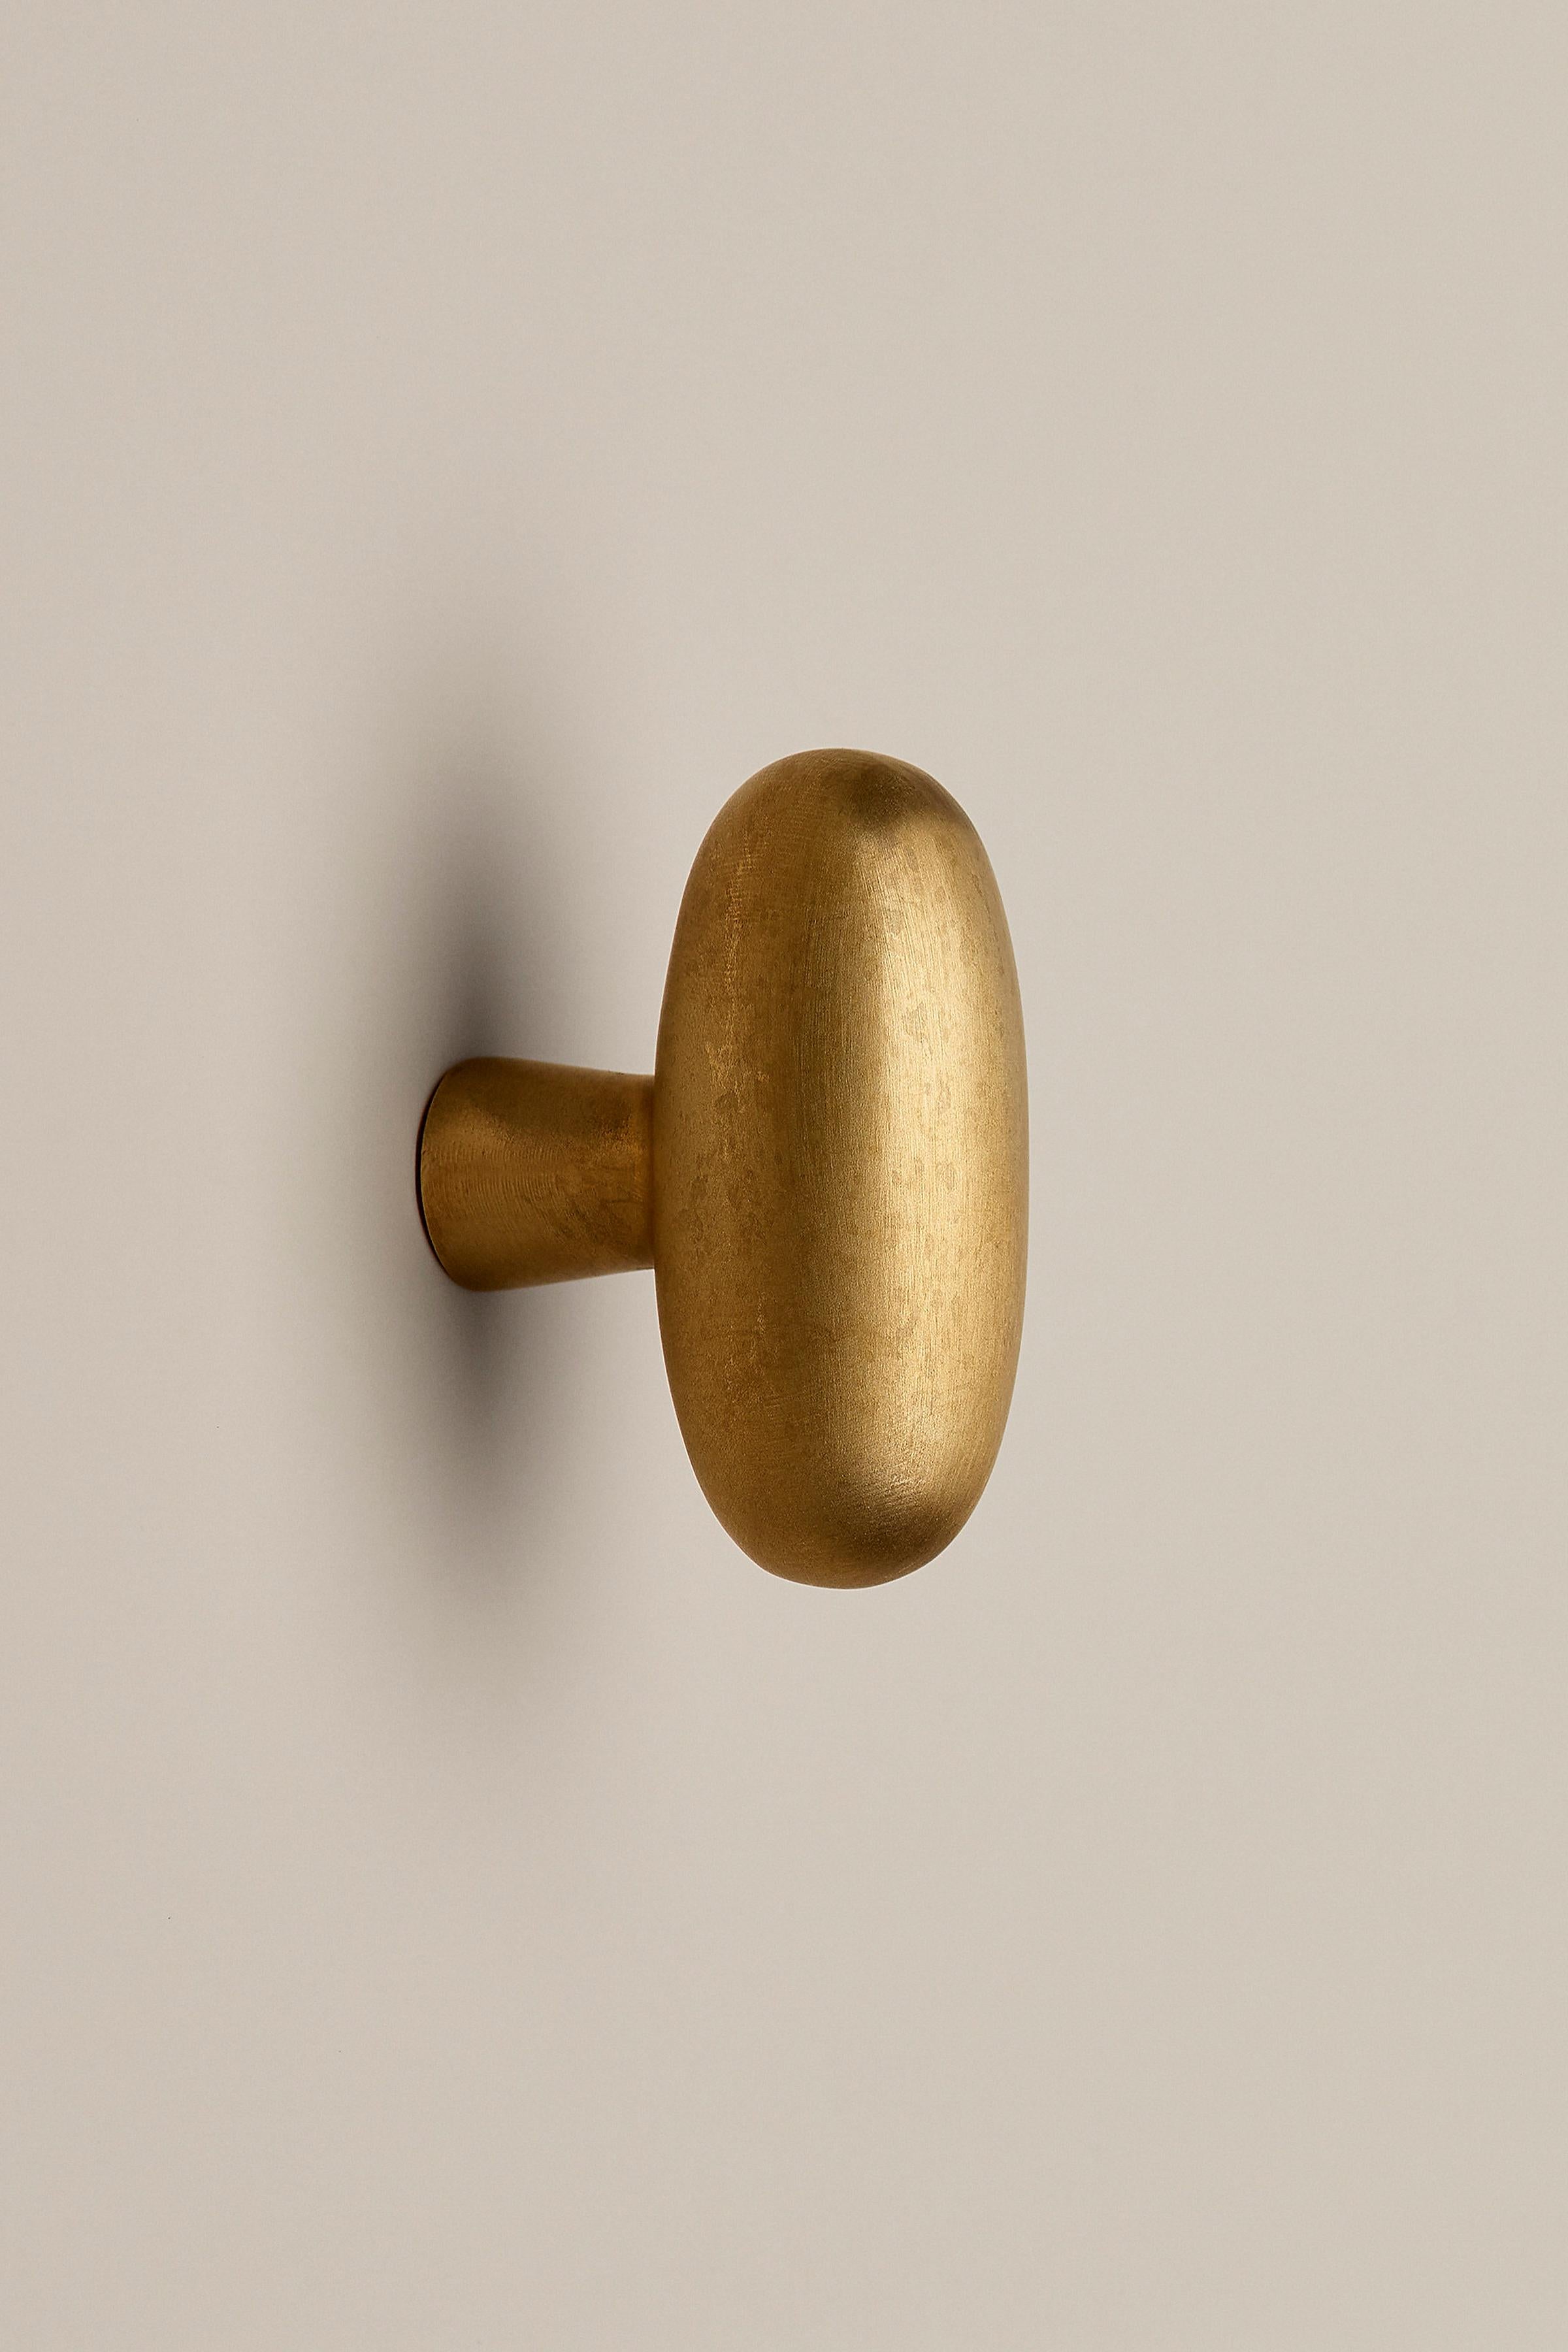 Organic Modern Contemporary Door Handle / Knob 'Blunt' by Spaces Within, Amber Brass For Sale